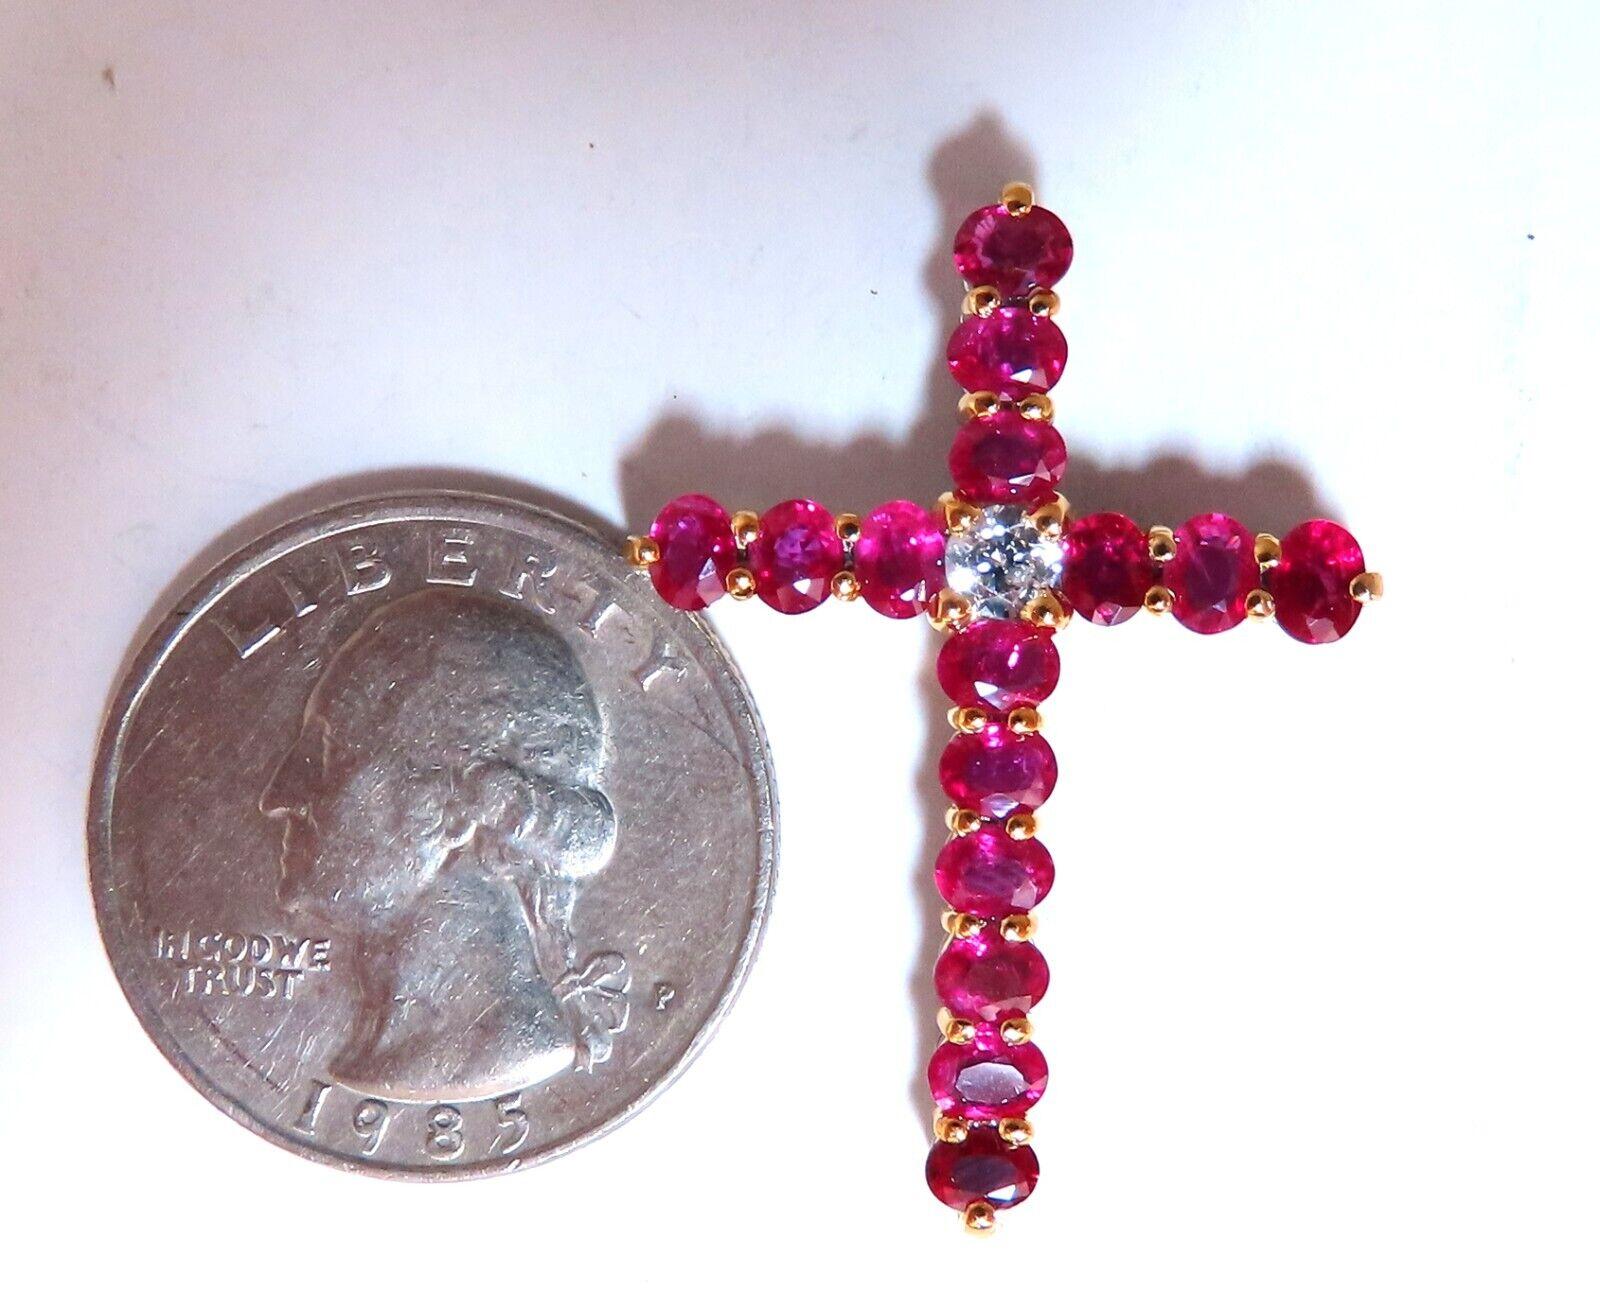 Natural Round Rubies & Diamond Cross.

.20ct. Brilliant Round Cut Natural Diamond

vs-2 clarity / H color

Natural 3ct Rubies

Brilliant oval, full cuts

clean clarity & transparent

Cross: 35 x 25mm

total weight: 4.9 grams.

18kt yellow